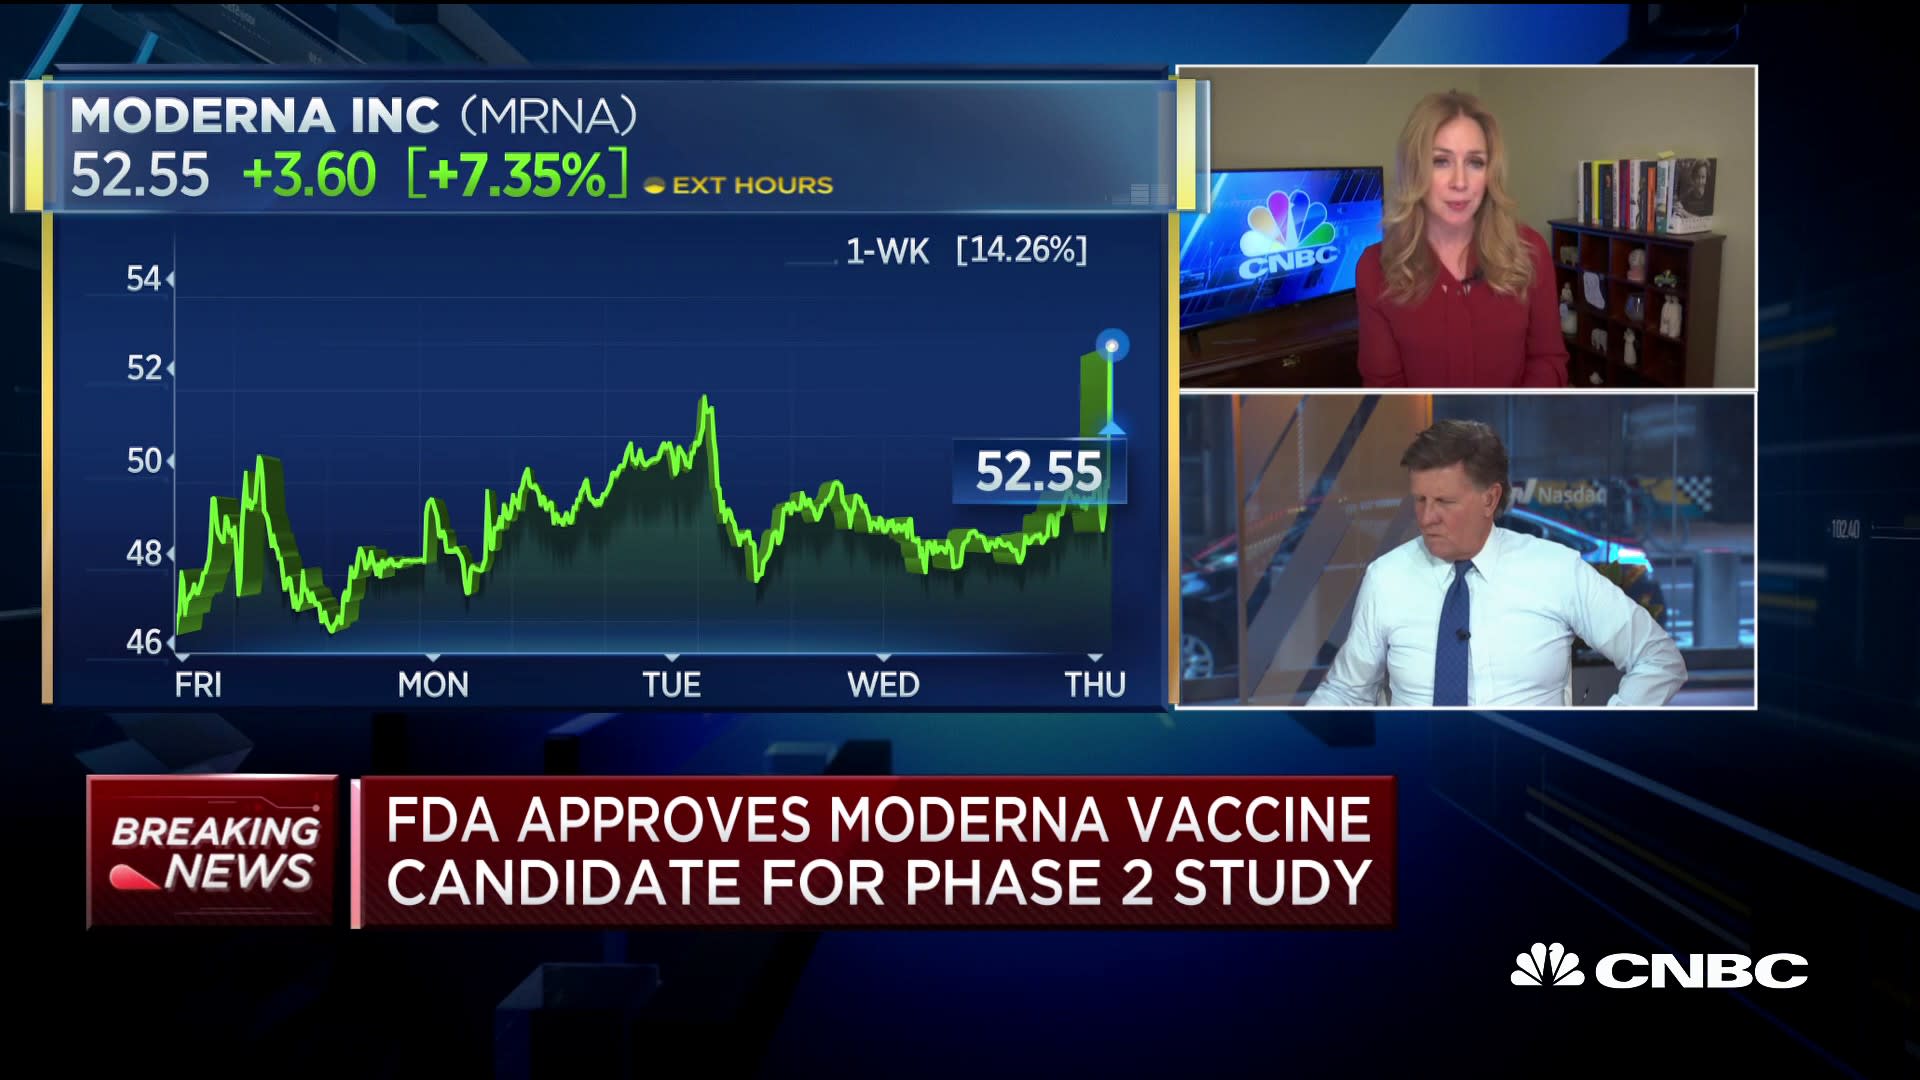 Moderna Shares Surge After Fda Approves Coronavirus Vaccine For